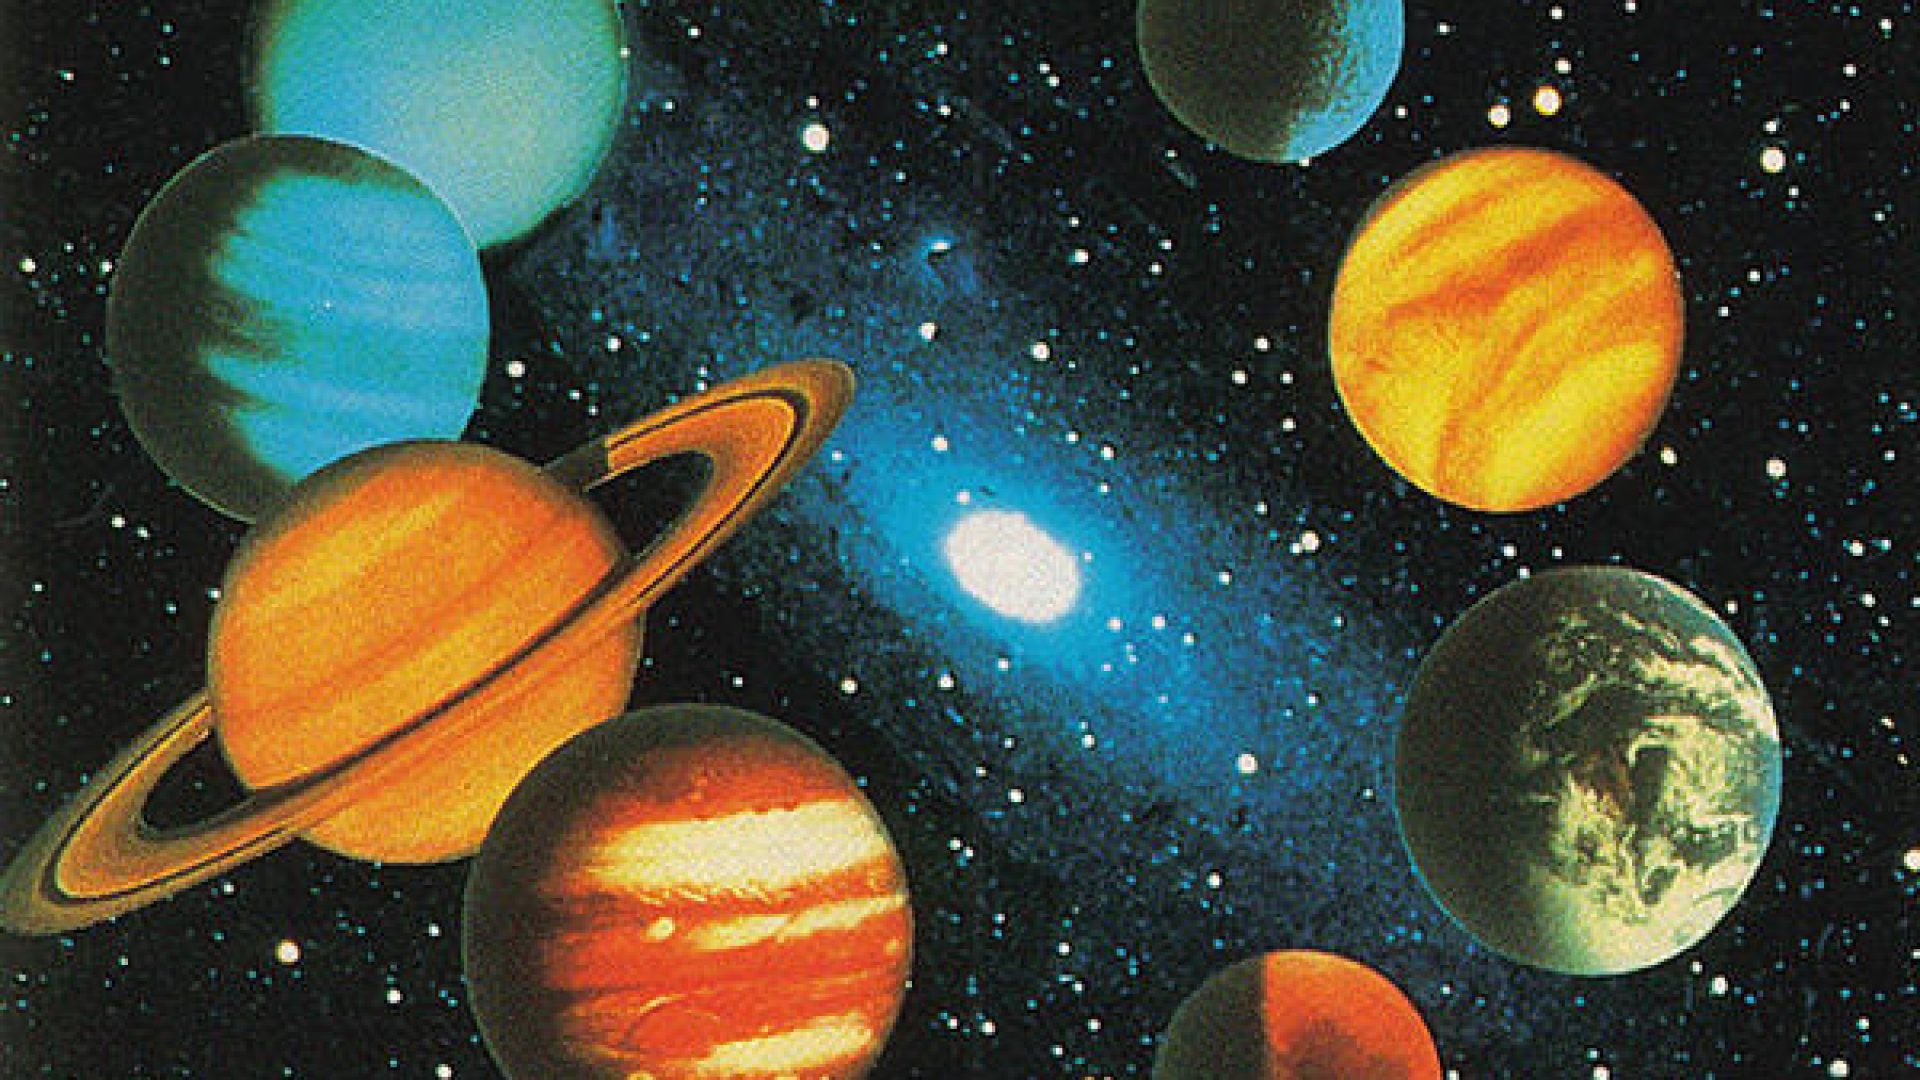 symphonies of the planets